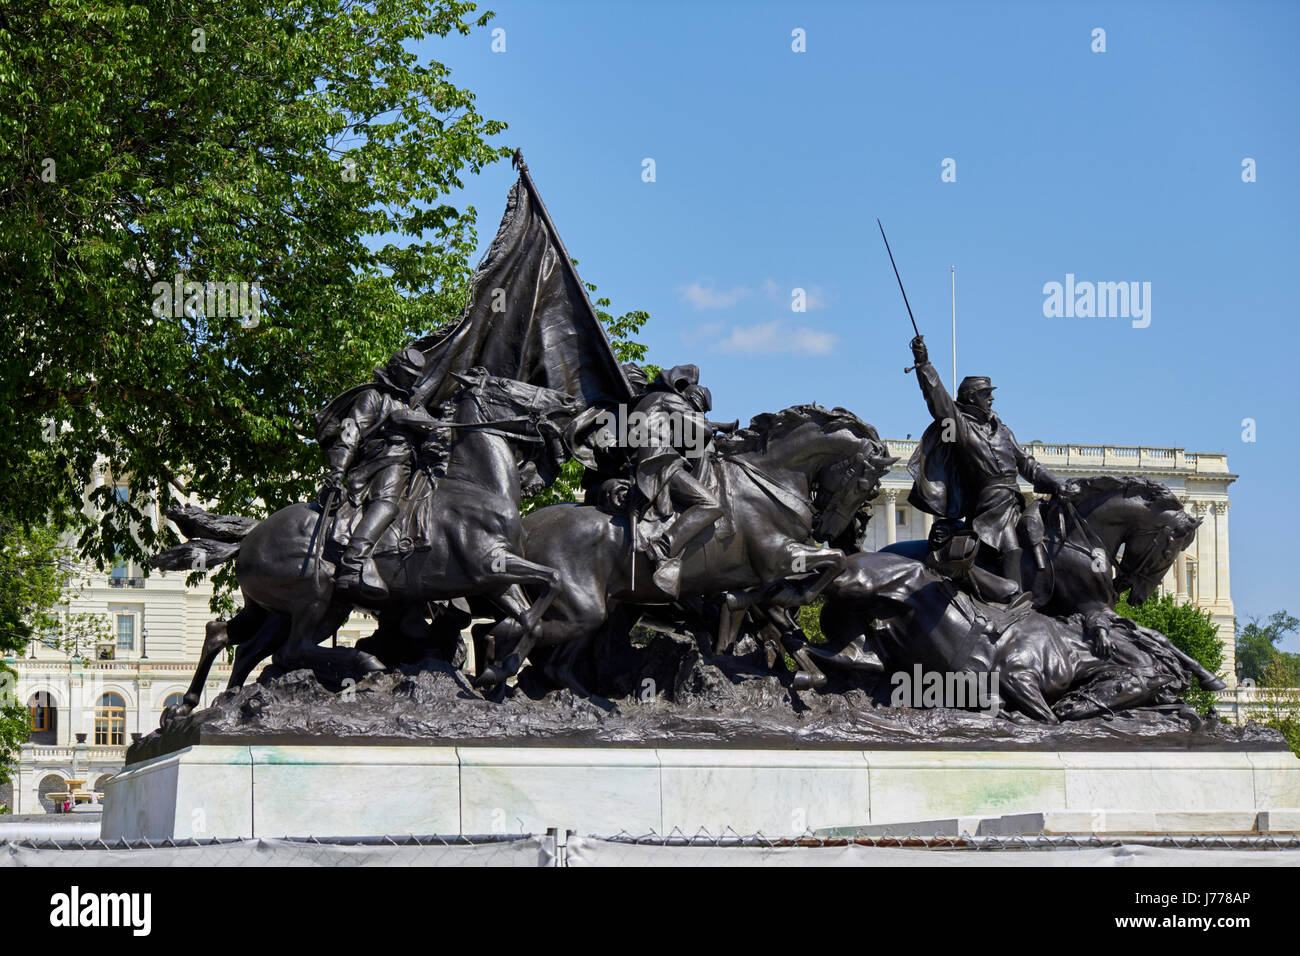 cavalry group at the ulysses s grant memorial Washington DC USA Stock Photo